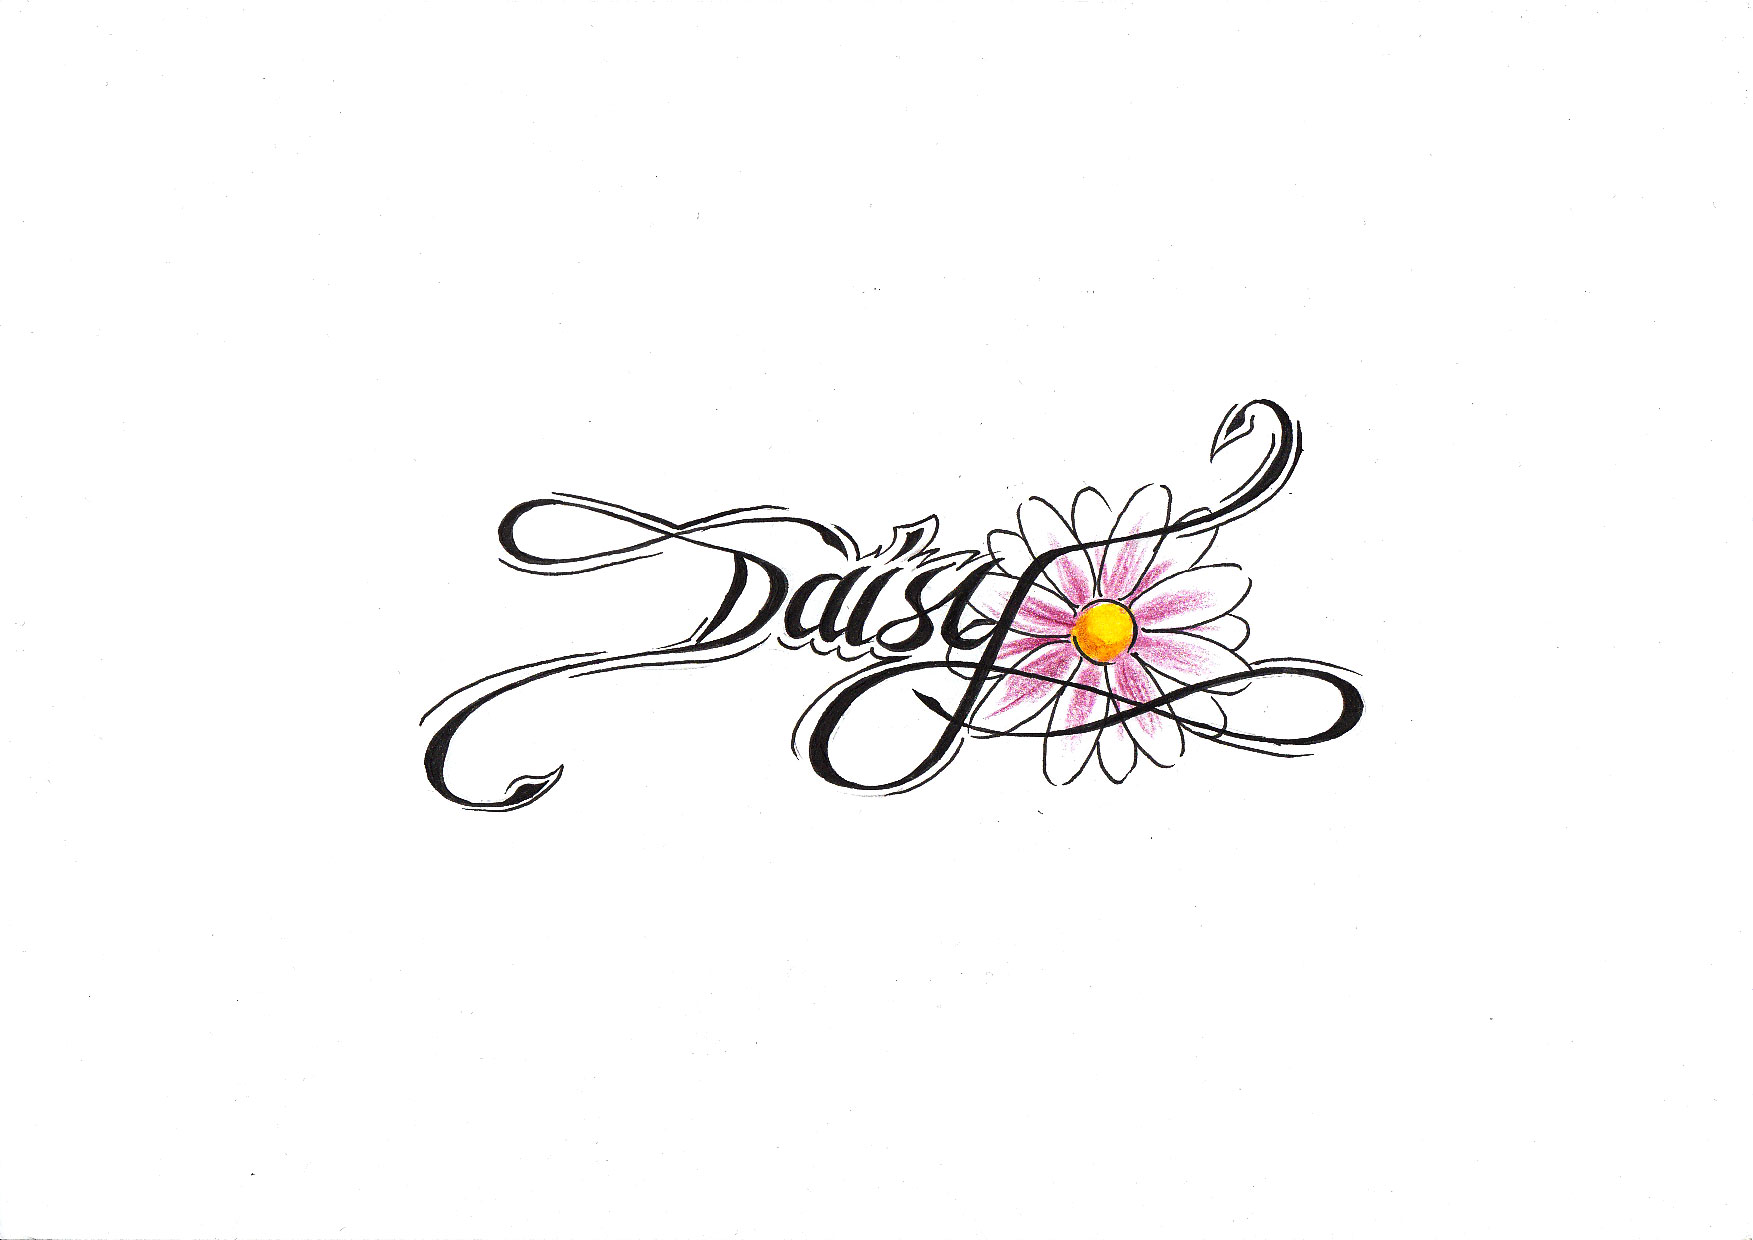 Daisy+tattoos+on+ankle